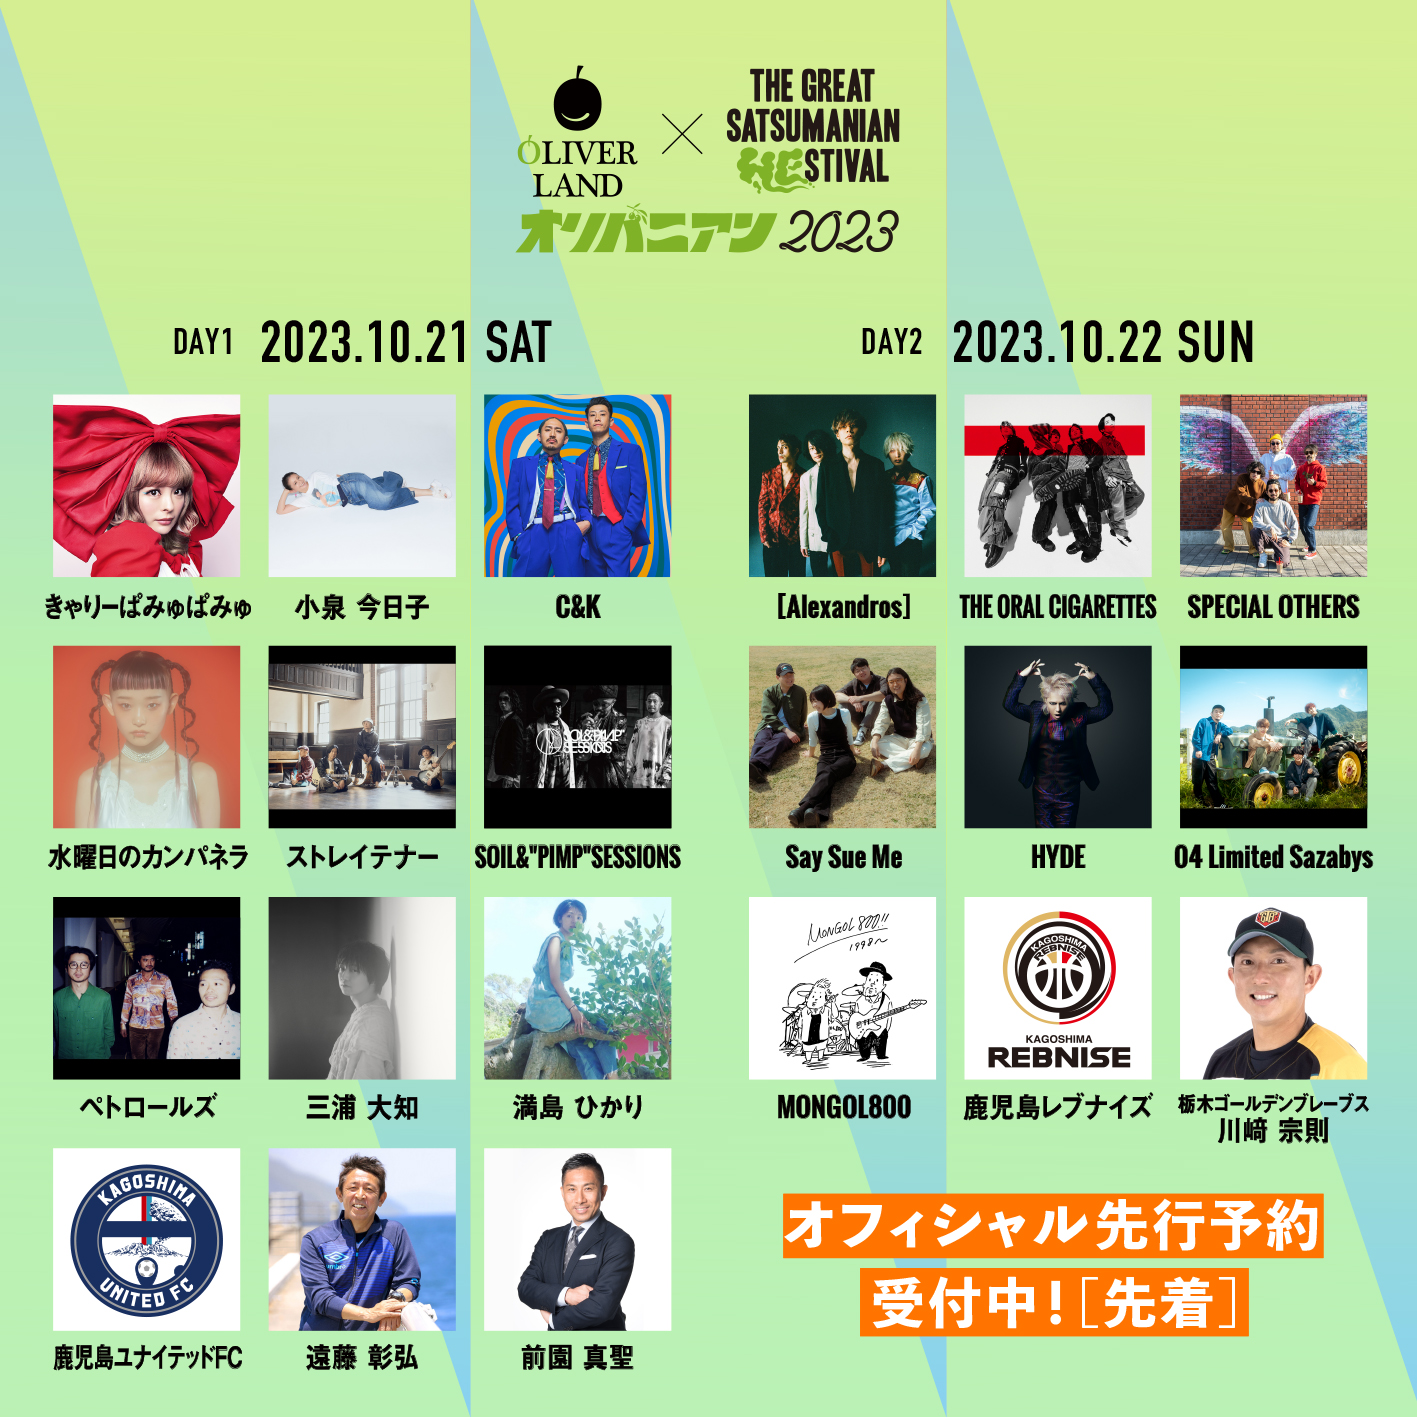 "OLIVER LAND × THE GREAT SATSUMANIAN HESTIVAL 2023" 出演決定！